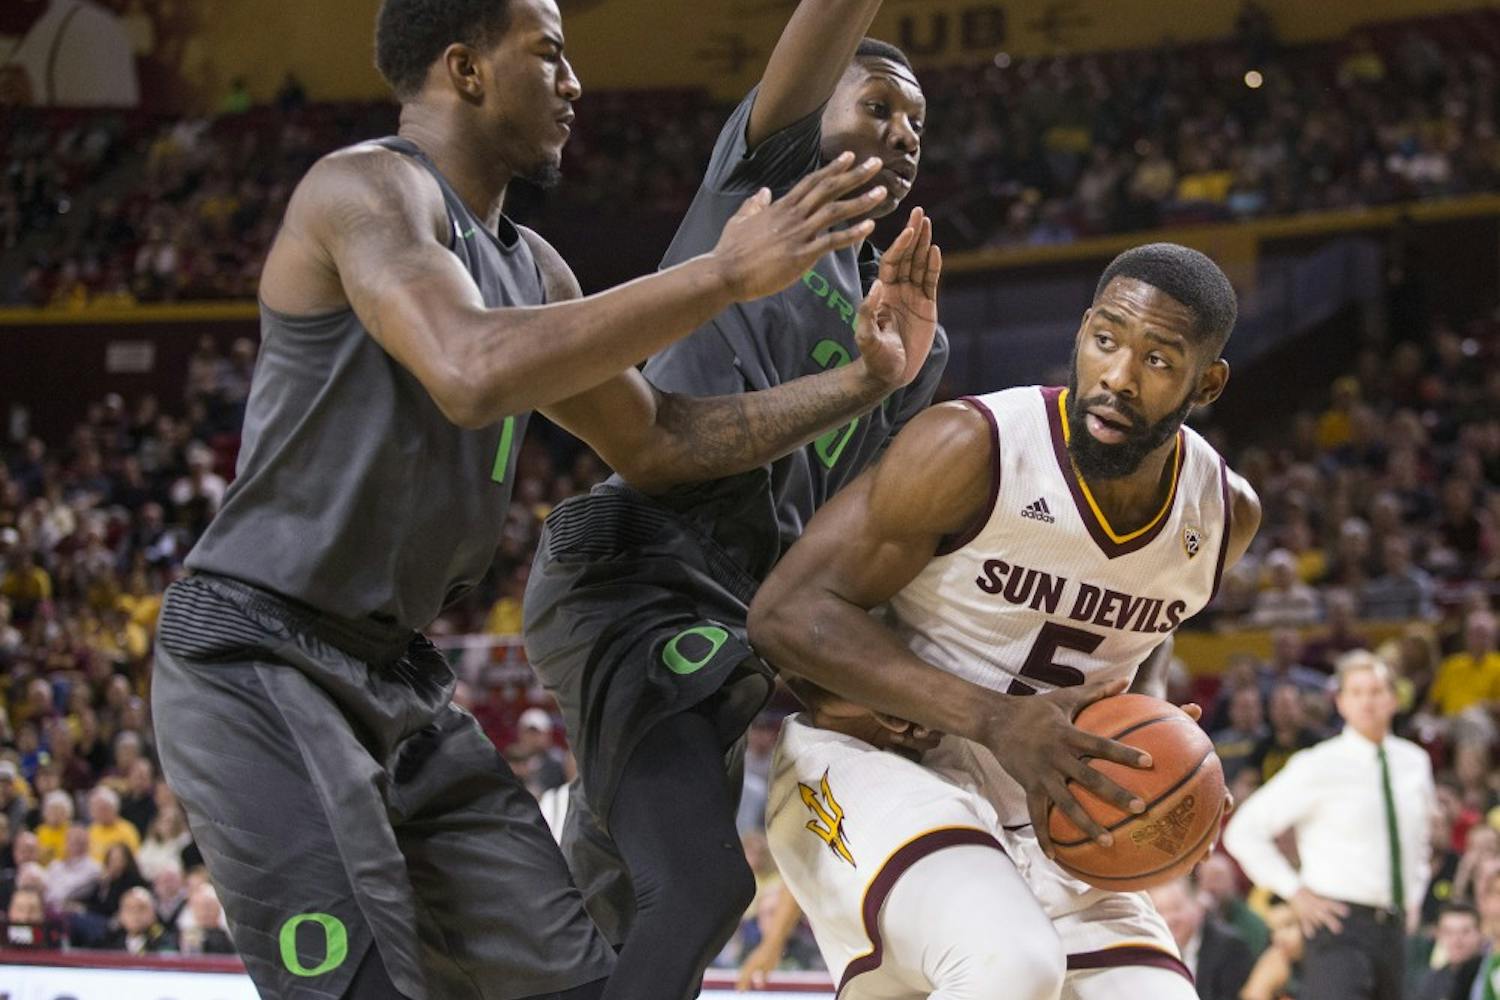 Arizona State Sun Devils forward Obinna Oleka (5) looks to pass during a game against the Oregon Ducks at Wells Fargo Arena in Tempe, Arizona, on Sunday, Jan. 31, 2016. The Ducks took the win from the Sun Devils, 91-74.